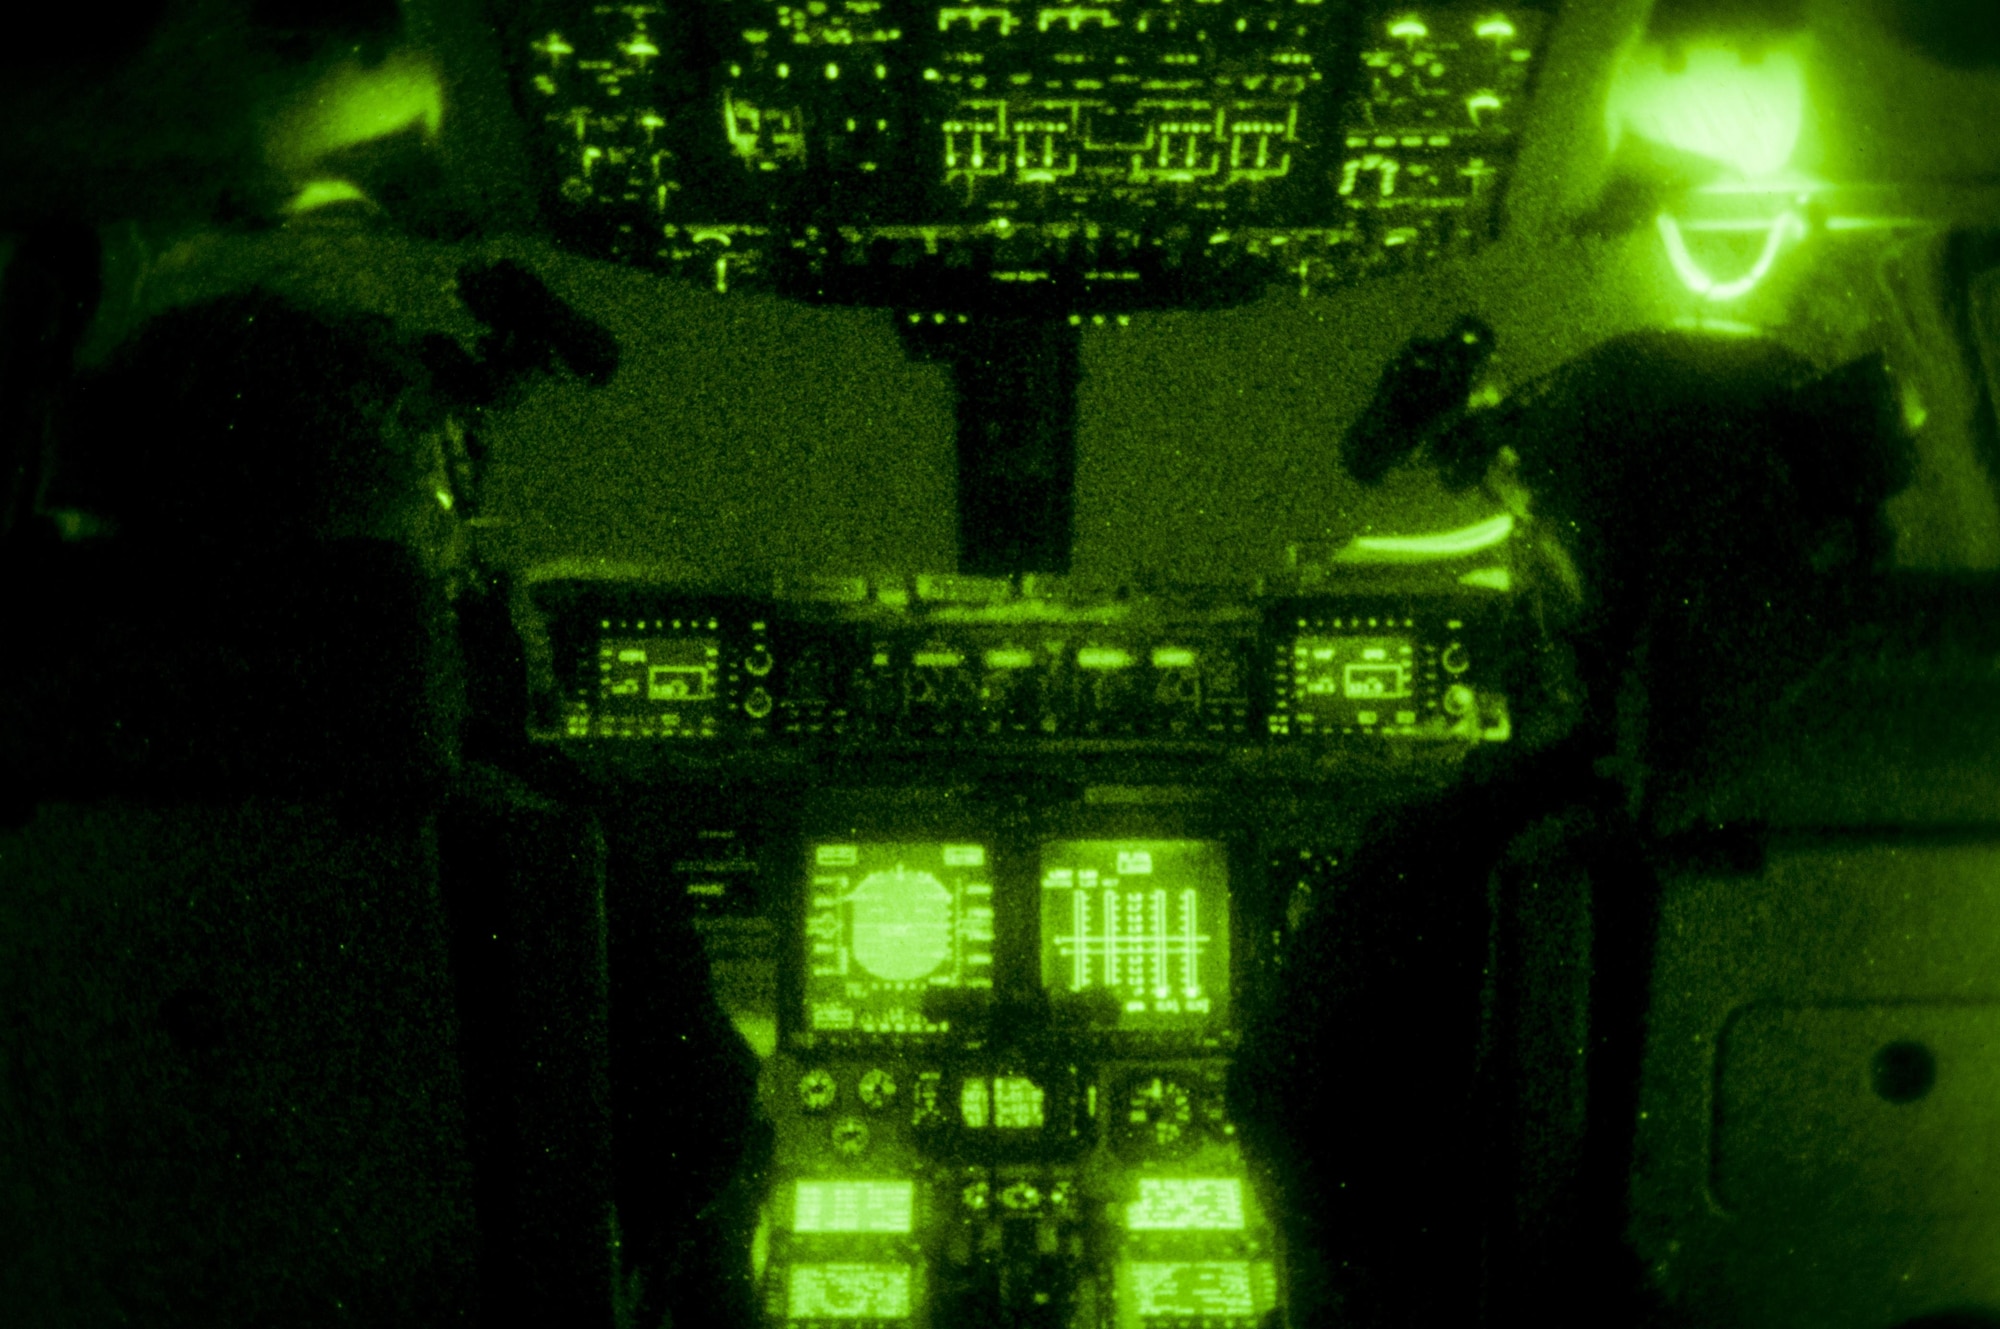 Captain Andrew Rast (left) and Lt. Col. J.W. Smith (right), 304th Expeditionary Airlift Squadron C-17 pilots, prepare to land a C-17 using night vision goggles on Pegasus Ice Runway near McMurdo Station, Antarctica July 15, 2016. Antarctica is the coldest, windiest, most inhospitable continent on the globe, and each trip to Antarctica requires careful planning and coordination. Operation Deep Freeze's new year-round operating seating opens doors for additional science and research to be conducted in support of the National Science Foundation-managed U.S.
Antarctic Program. (U.S. Air Force Reserve photo by Staff Sgt. Madelyn
McCullough)

